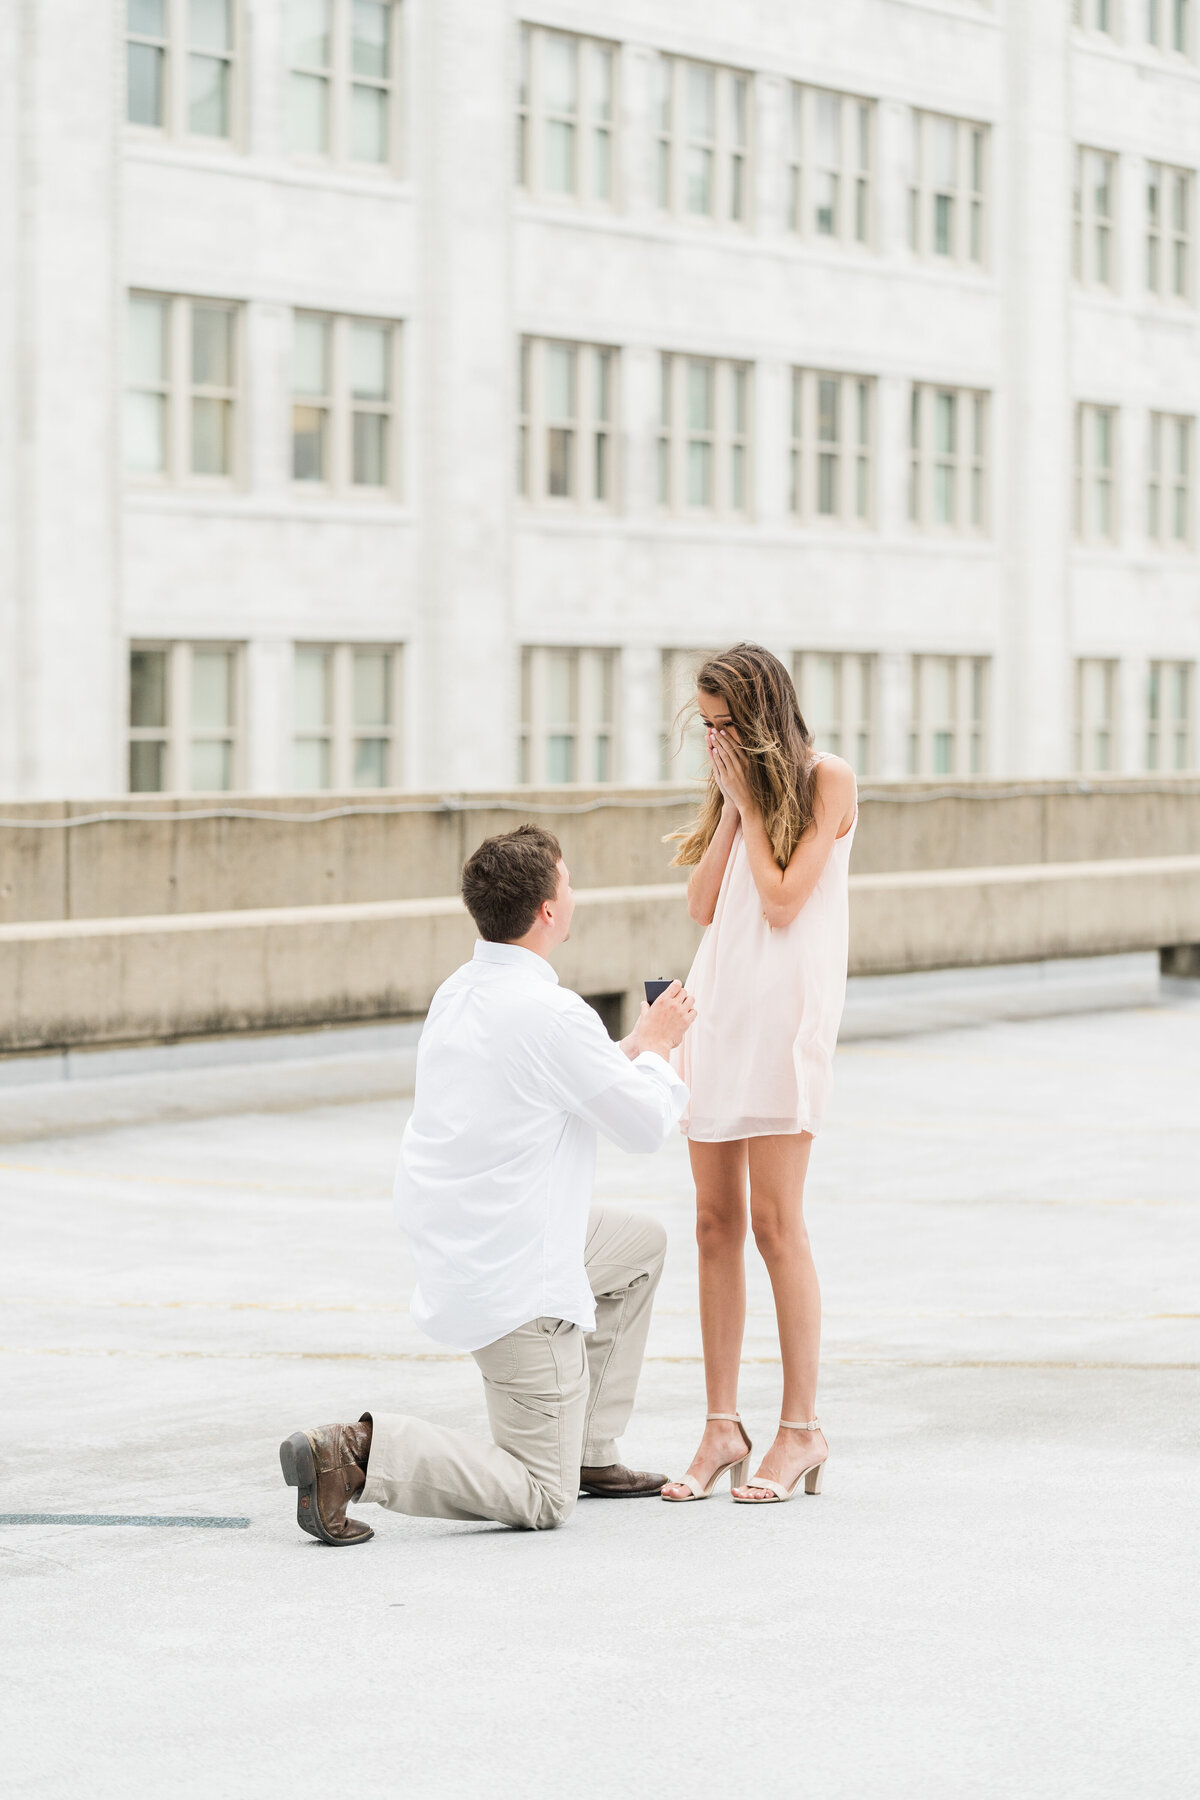 Proposal photoshoot on a rooftop in Alabama